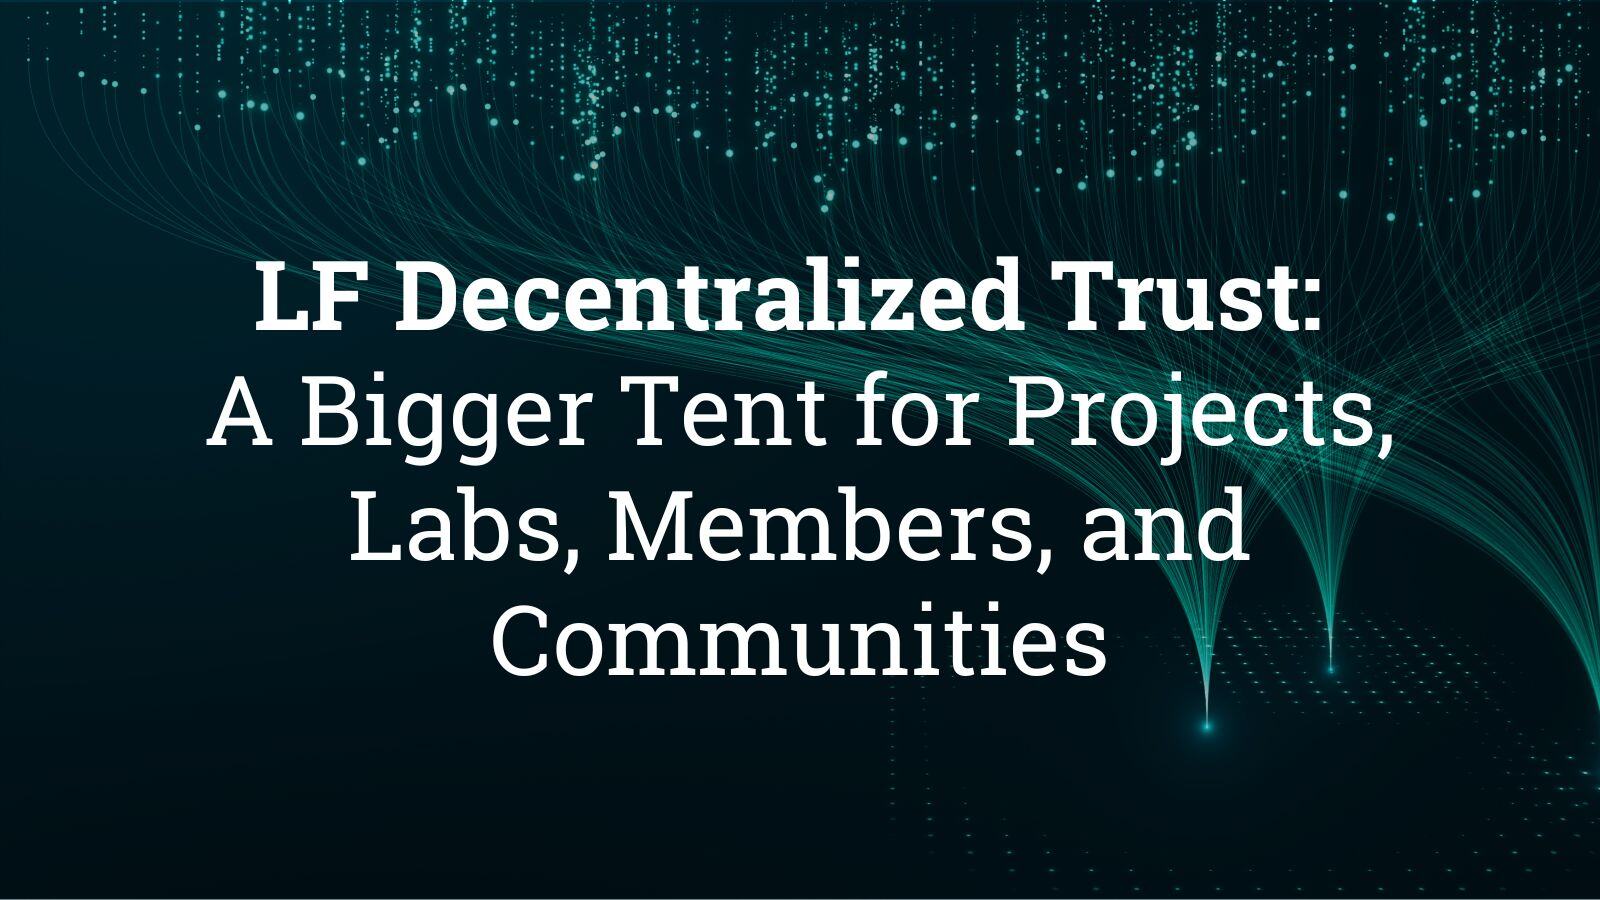 LF Decentralized Trust: A Bigger Tent for Projects, Labs, Members, and Communities